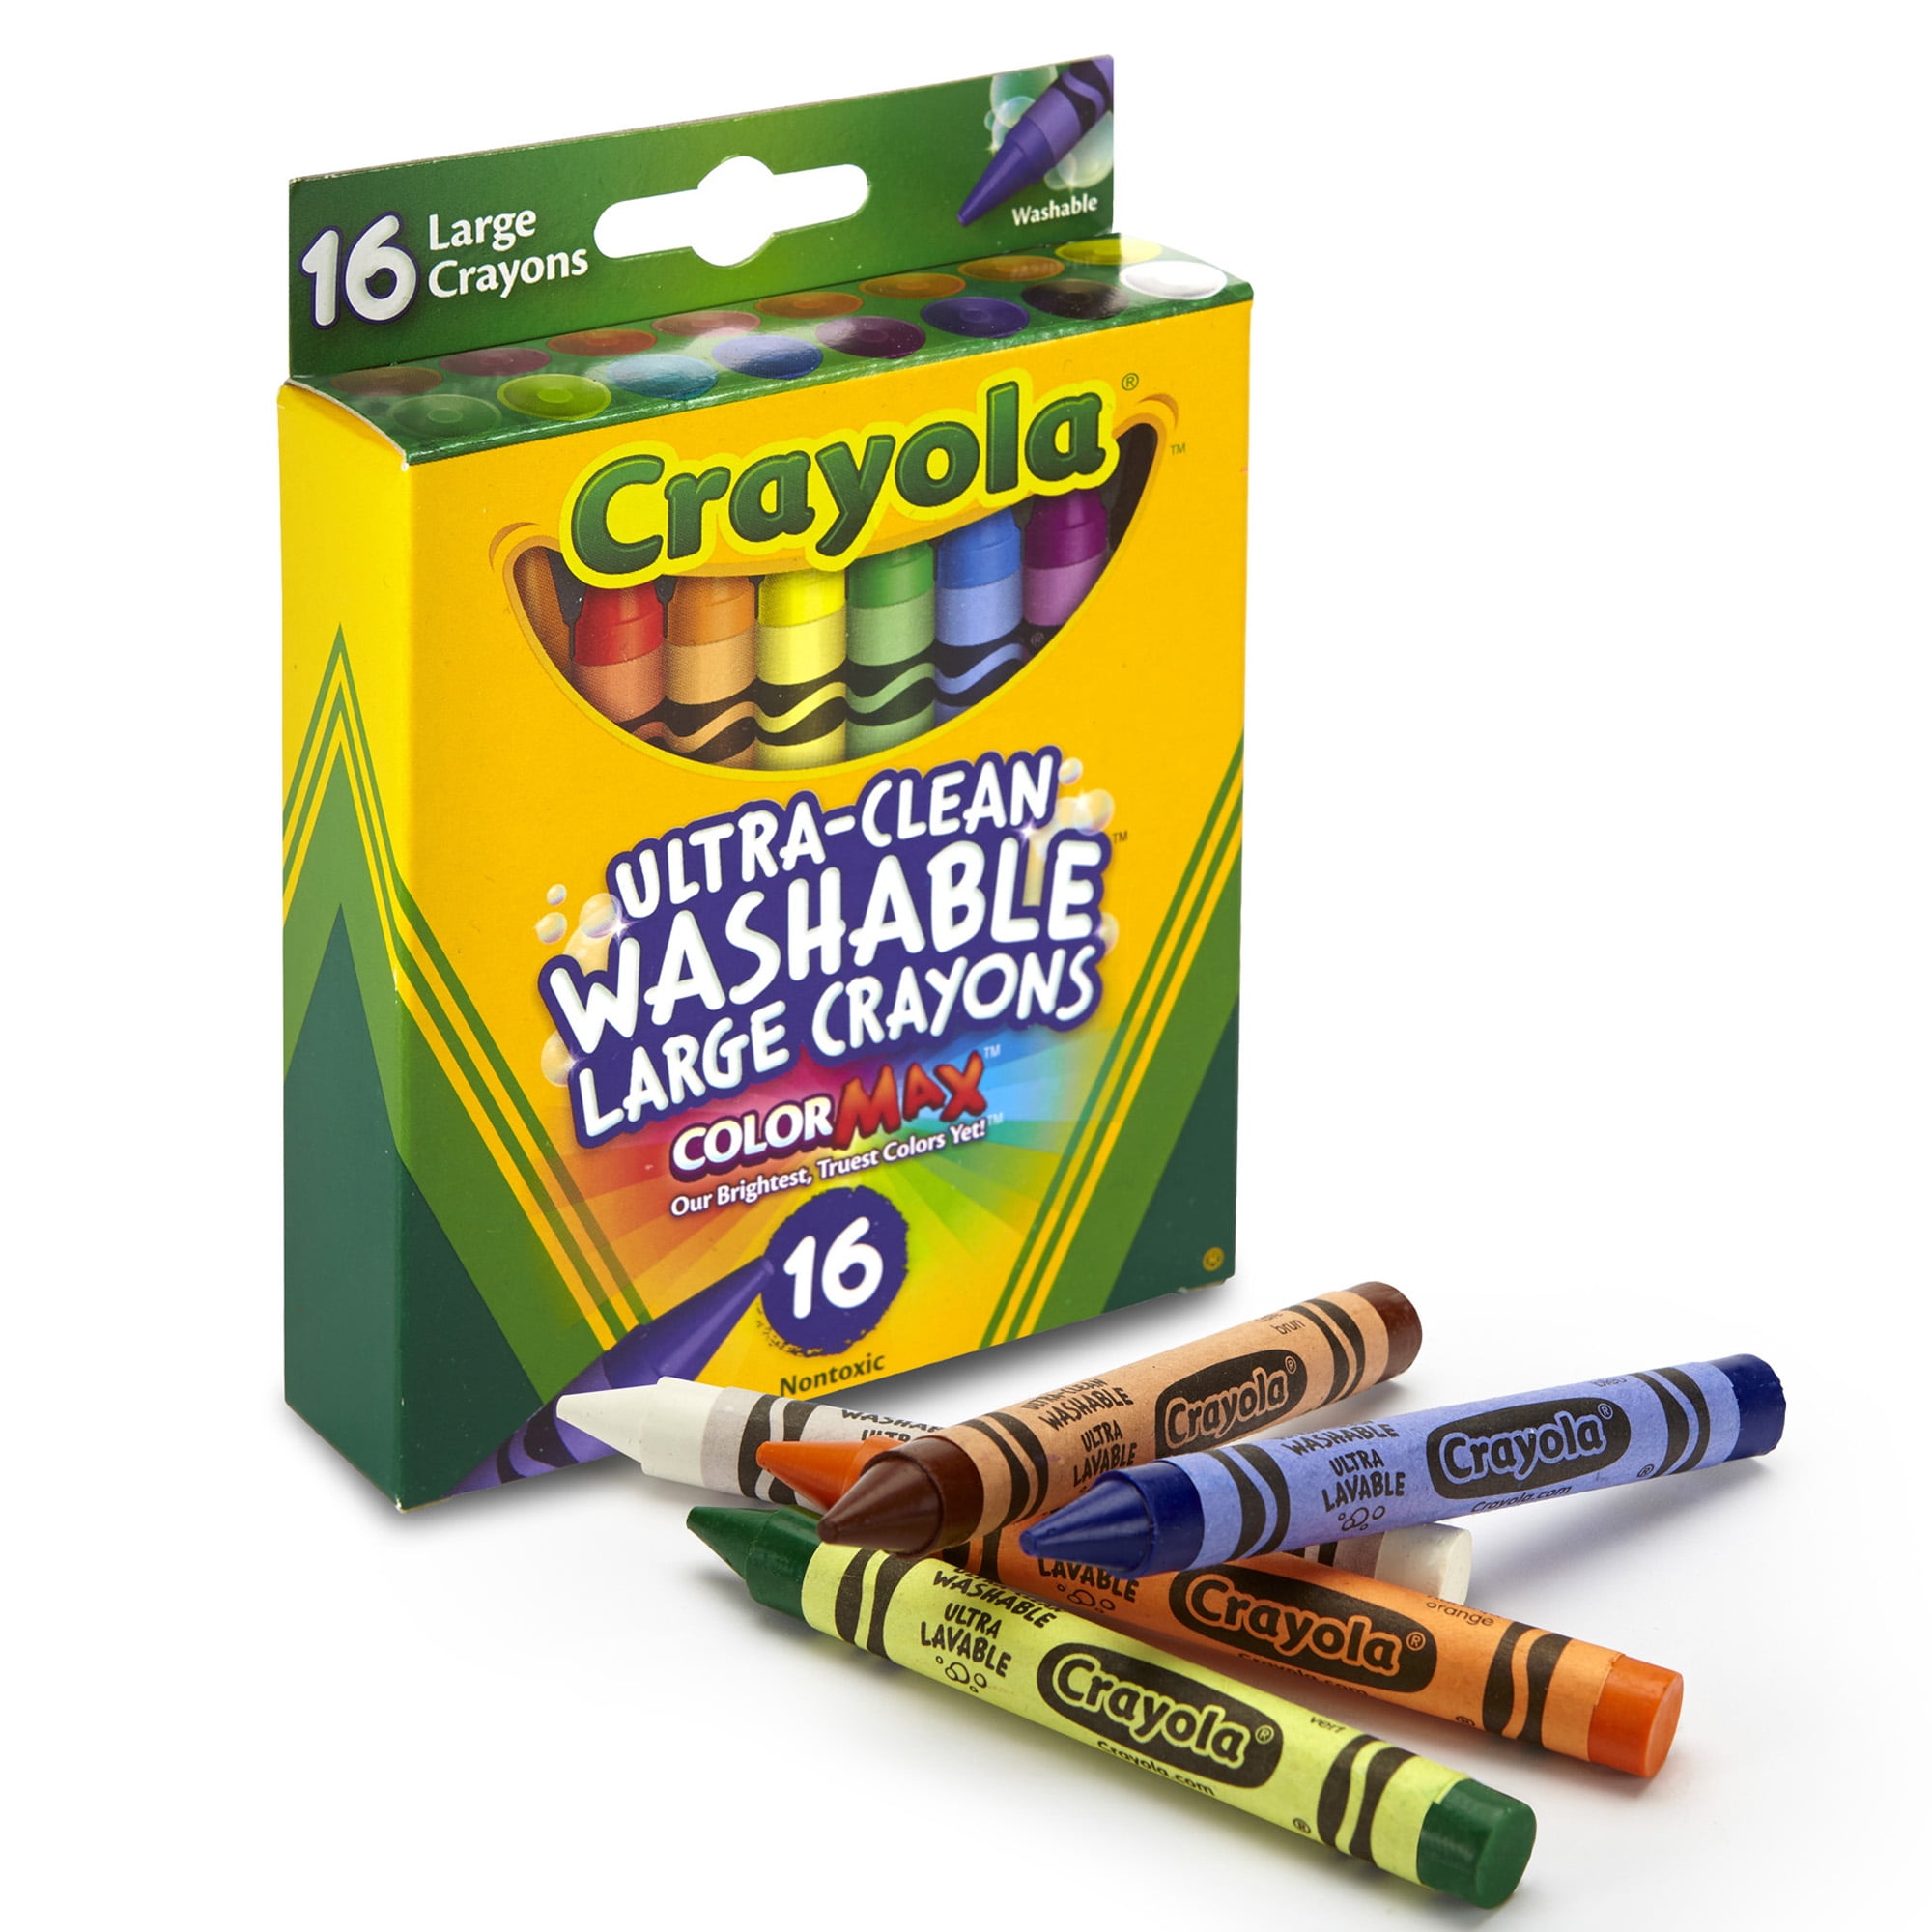 Jar Melo 16 Colors Jumbo Crayons for Toddlers, Non Toxic Washable